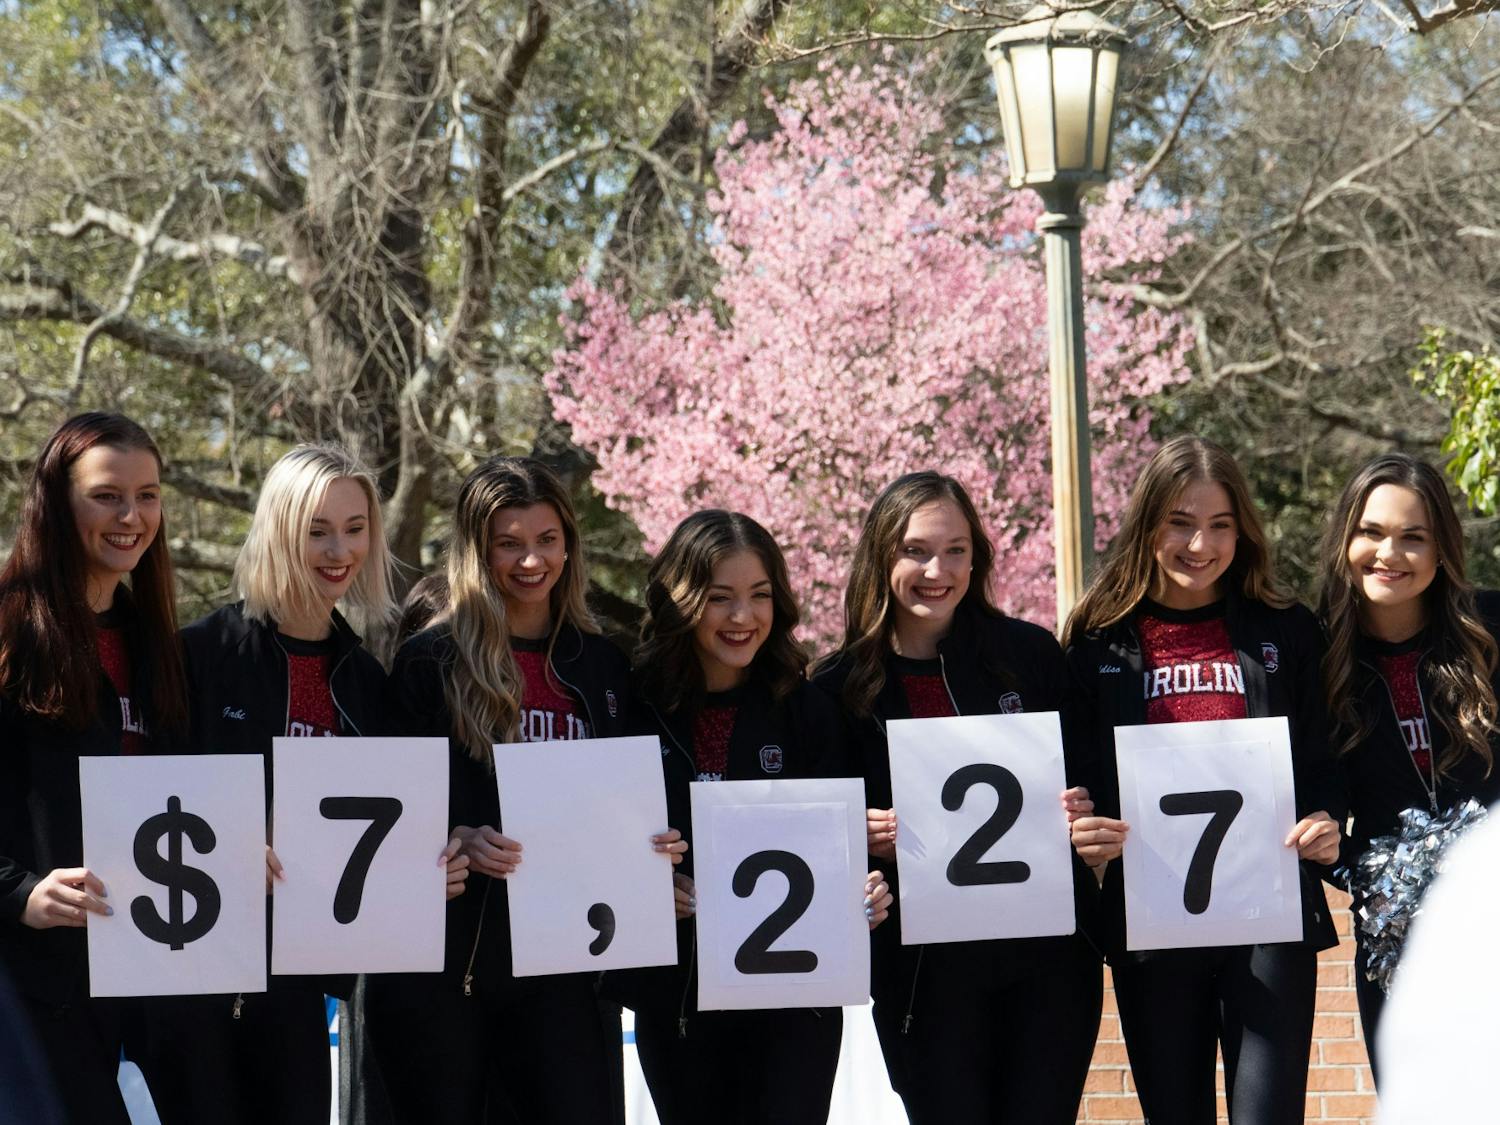 Community members and supporters of NEDA raised $7,227 to in support of those who suffer from eating disorders on Feb. 26, 2022.The NEDA Walk took place as a charity event raise support and money for those who effected by eating disorders.